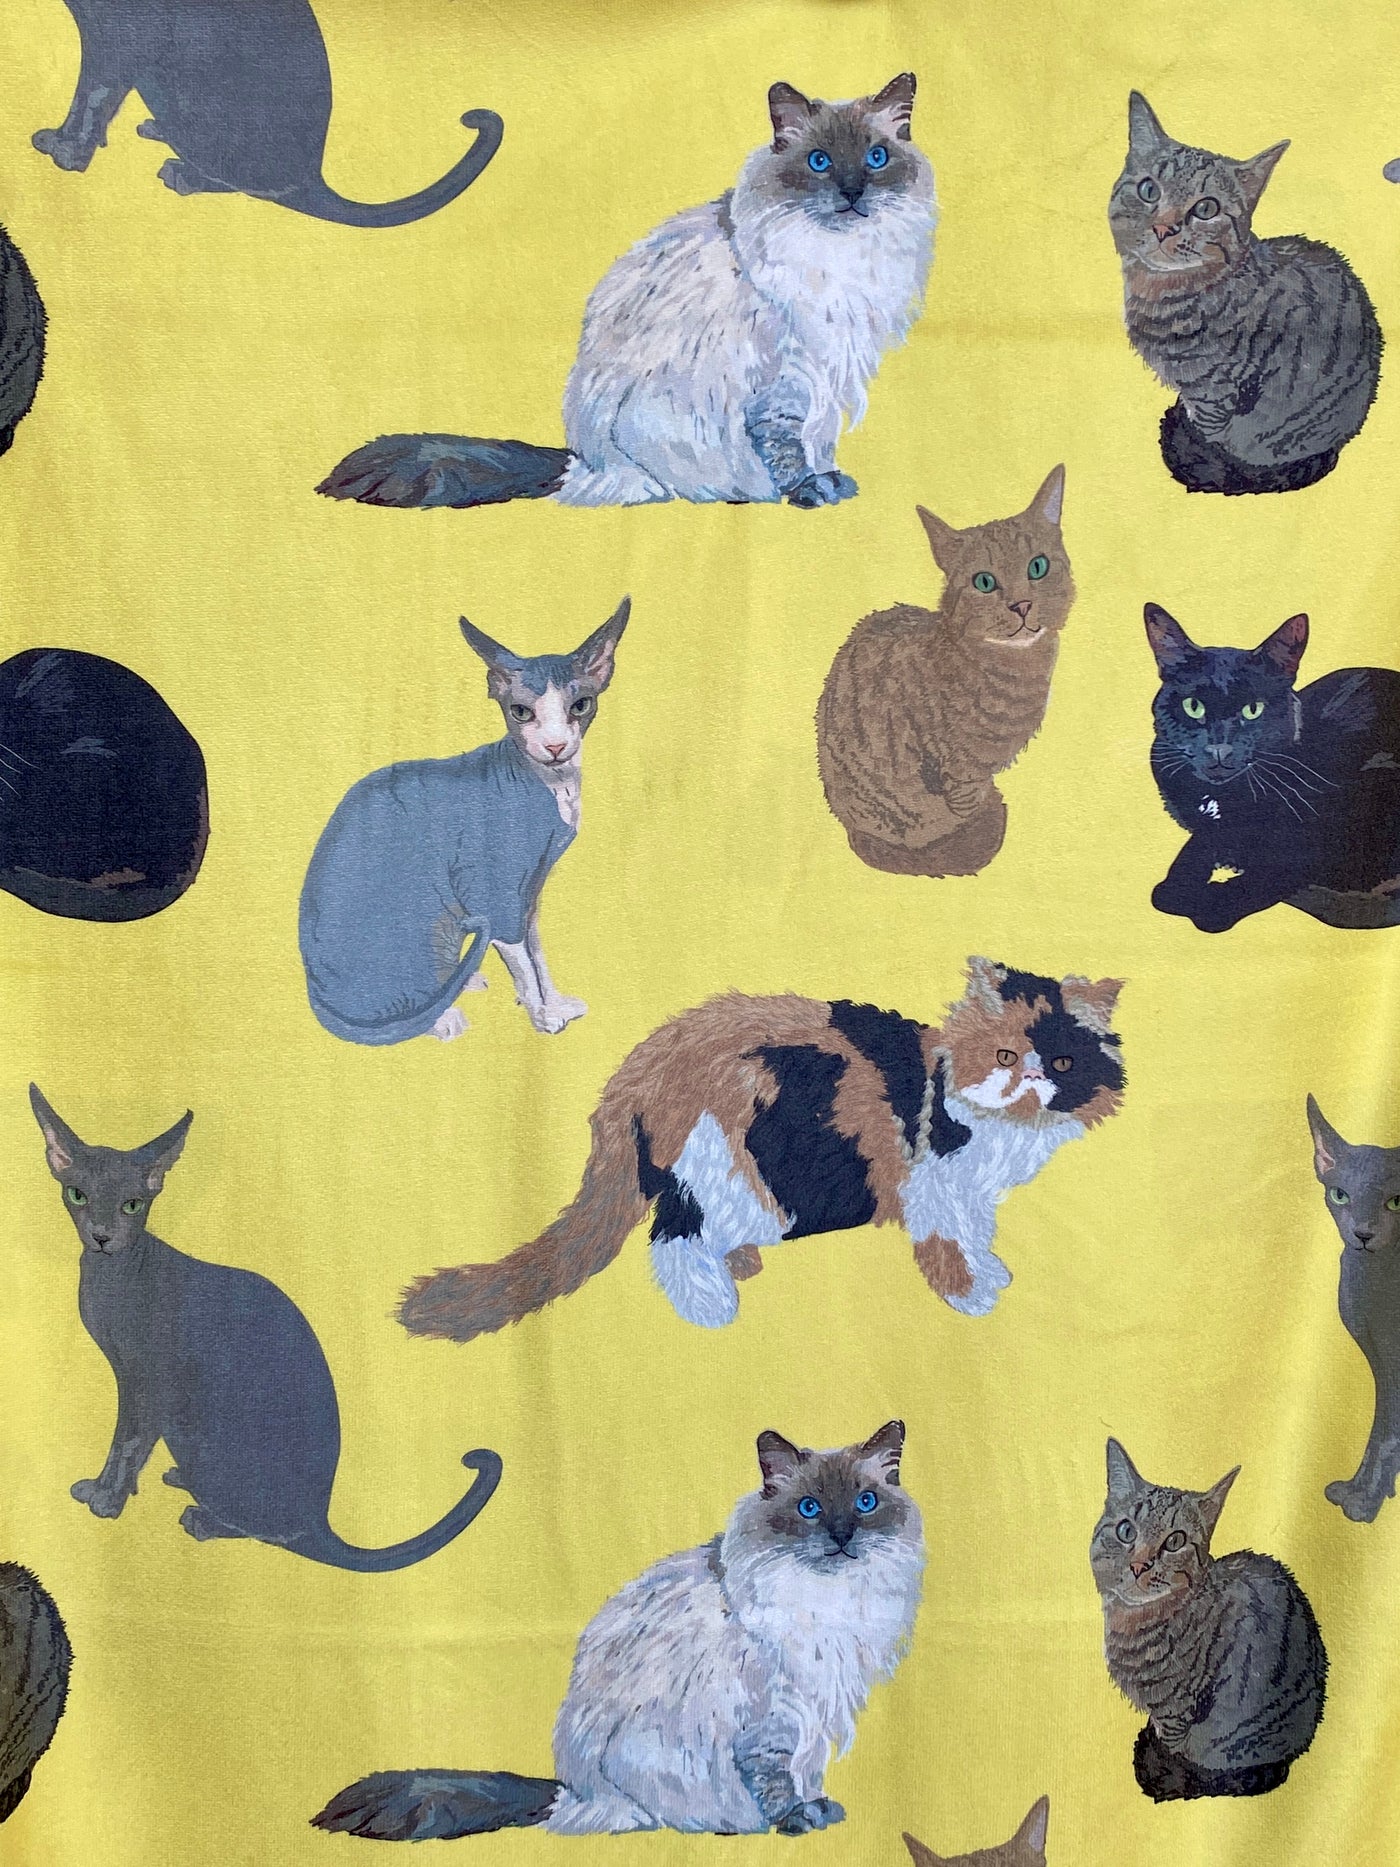 Hooded Baby Towel (0-18 months): My Cat Friends (Yellow Background)